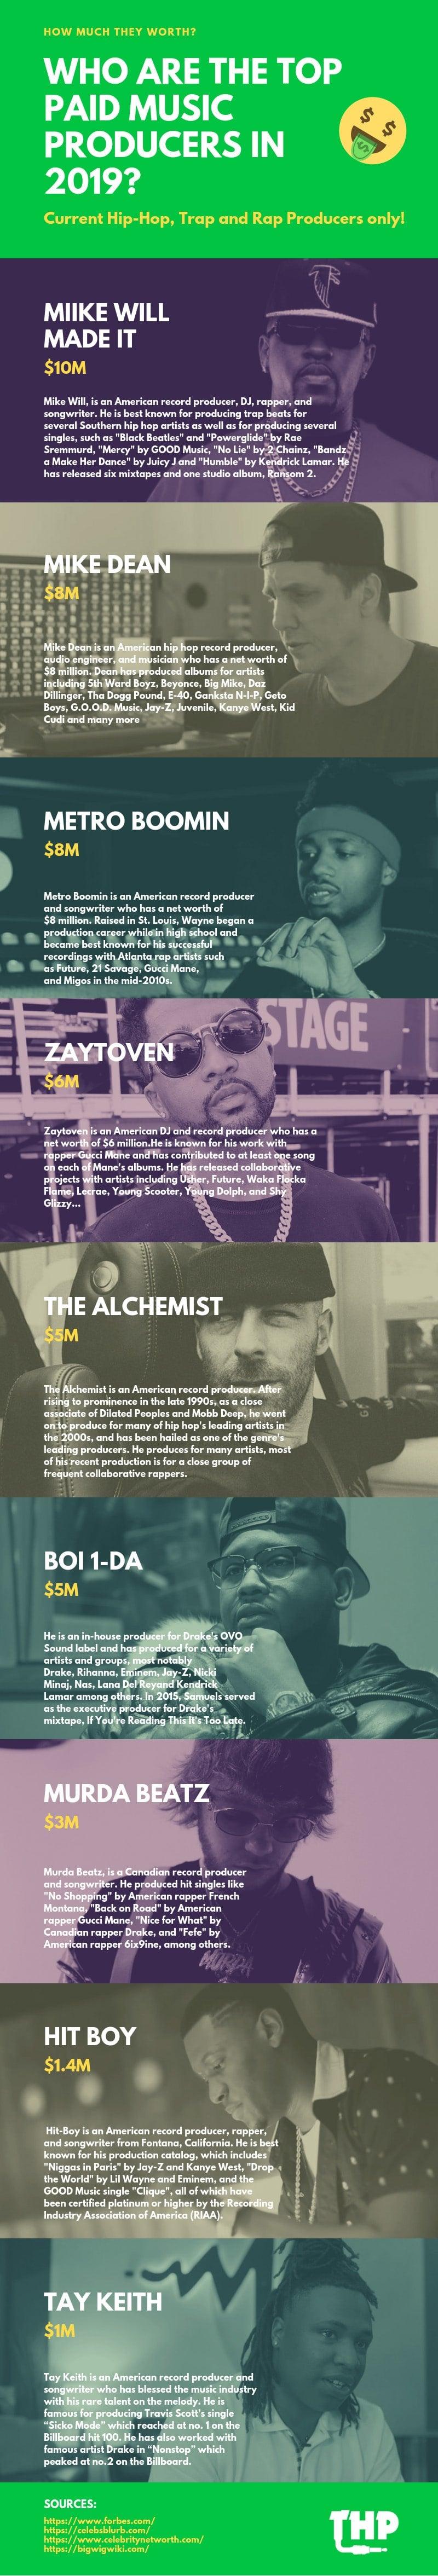 The Highest Paid Producers in Hip-Hop Industry